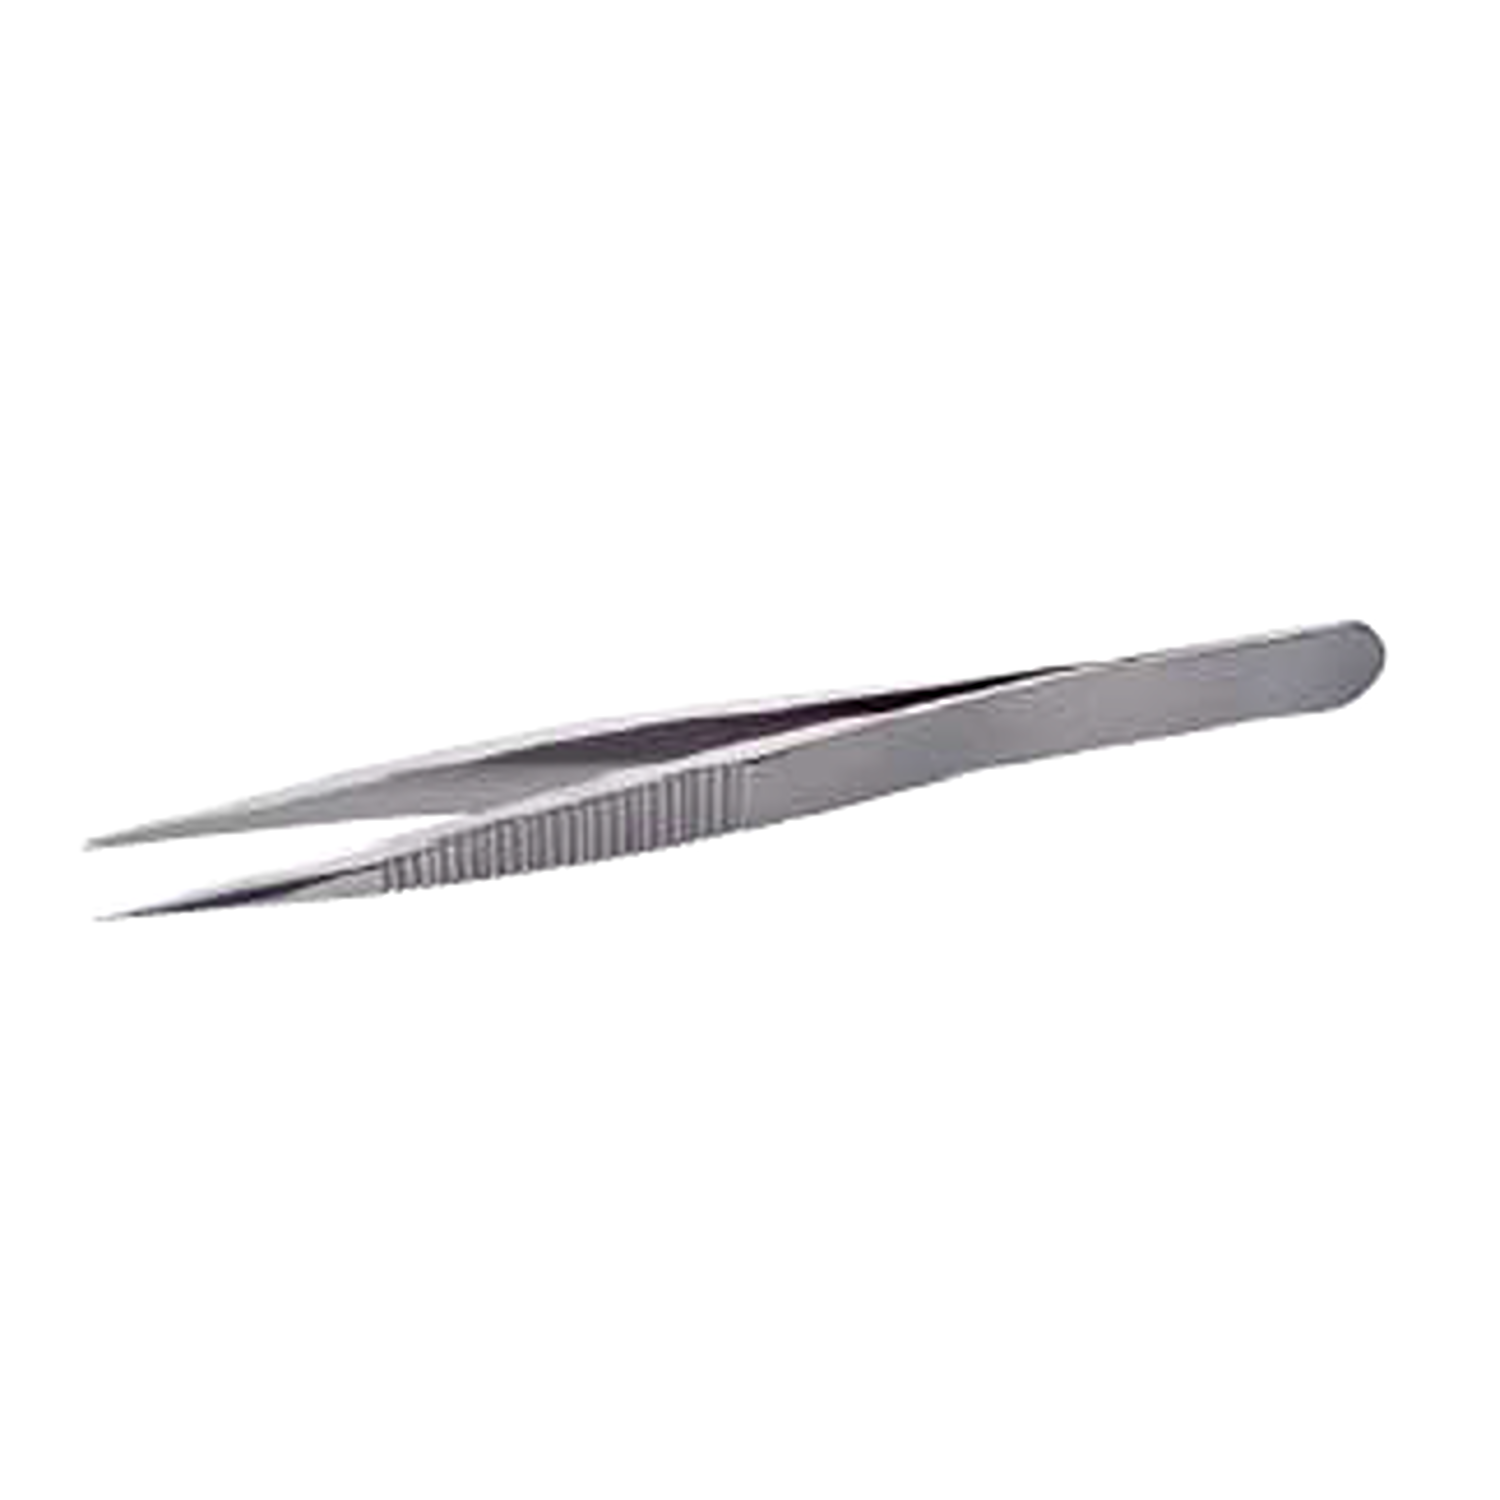 BAHCO TL 00B-SA Stainless Steel High Precision Tweezers - Premium Tweezers from BAHCO - Shop now at Yew Aik.